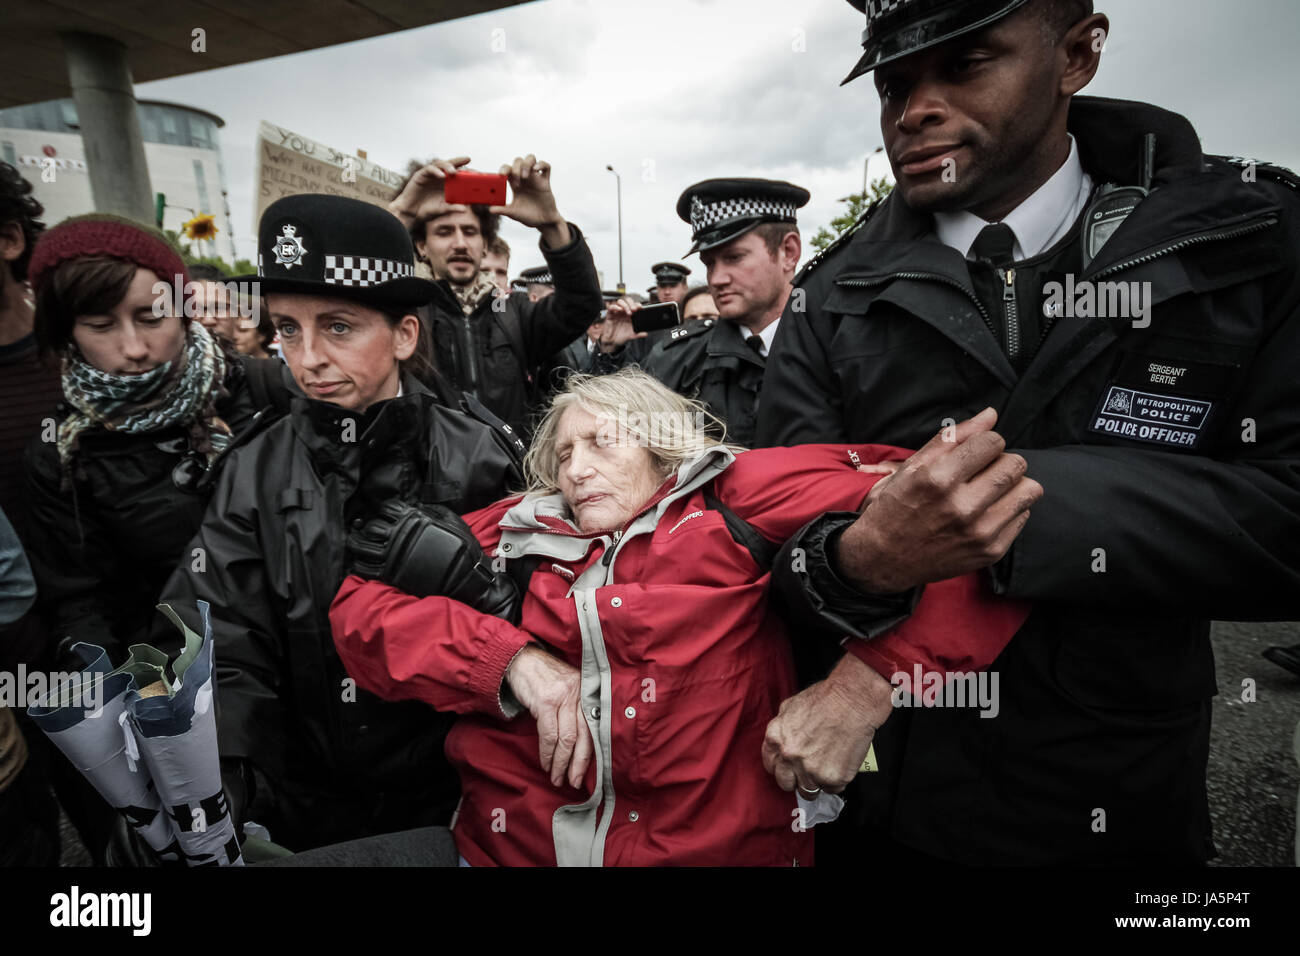 Stop the DSEi Arms Fair. Anti-war protest outside Excel Centre in east London, UK. Stock Photo